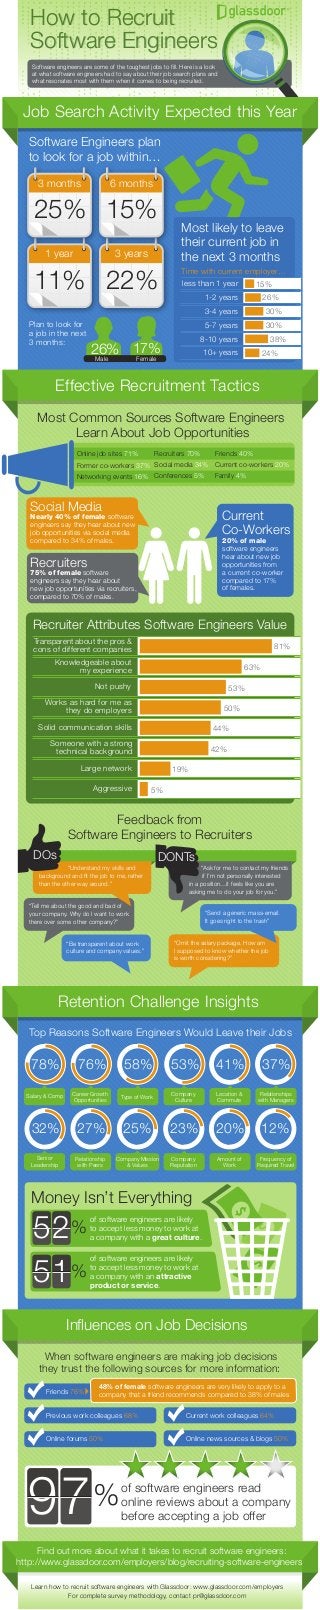 How to Recruit
Software Engineers
How to Recruit
Software Engineers
Software engineers are some of the toughest jobs to ﬁll. Here is a look
at what software engineers had to say about their job search plans and
what resonates most with them when it comes to being recruited.
Effective Recruitment Tactics
Most Common Sources Software Engineers
Learn About Job Opportunities
Social Media
Nearly 40% of female software
engineers say they hear about new
job opportunities via social media
compared to 34% of males.
Knowledgeable about
my experience
Not pushy
Works as hard for me as
they do employers
Solid communication skills
Someone with a strong
technical background
Large network
Aggressive
63%
Recruiter Attributes Software Engineers Value
Feedback from
Software Engineers to Recruiters
“Understand my skills and
background and ﬁt the job to me, rather
than the other way around.”
“Tell me about the good and bad of
your company. Why do I want to work
there over some other company?”
“Omit the salary package. How am
I supposed to know whether the job
is worth considering?”
“Be transparent about work
culture and company values.”
“Send a generic mass-email.
It goes right to the trash”
“Ask for me to contact my friends
if I’m not personally interested
in a position…it feels like you are
asking me to do your job for you.”
Retention Challenge Insights
Inﬂuences on Job Decisions
When software engineers are making job decisions
they trust the following sources for more information:
Top Reasons Software Engineers Would Leave their Jobs
78% 58% 53% 41%
12%20%23%25%27%32%
97%
Money Isn’t Everything
52%
51%
of software engineers are likely
to accept less money to work at
a company with a great culture.
Friends 76%
Previous work colleagues 68% Current work colleagues 64%
Online forums 50% Online news sources & blogs 50%
of software engineers are likely
to accept less money to work at
a company with an attractive
product or service.
of software engineers read
online reviews about a company
before accepting a job offer
Learn how to recruit software engineers with Glassdoor: www.glassdoor.com/employers
For complete survey methodology, contact pr@glassdoor.com
Plan to look for
a job in the next
3 months:
26% 17%
Male Female
1 year
11%
3 years
22%
3 months
25%
6 months
15%
Job Search Activity Expected this Year
Software Engineers plan
to look for a job within…
Time with current employer…
Most likely to leave
their current job in
the next 3 months
less than 1 year
1-2 years
3-4 years
5-7 years
8-10 years
10+ years
15%
26%
30%
30%
38%
24%
20% of male
software engineers
hear about new job
opportunities from
a current co-worker
compared to 17%
of females.
Current
Co-Workers
Recruiters
75% of female software
engineers say they hear about
new job opportunities via recruiters,
compared to 70% of males.
Transparent about the pros &
cons of different companies 81%
53%
50%
44%
42%
19%
5%
Online job sites 71%
Former co-workers 37%
Networking events 16%
Recruiters 70%
Social media 34%
Conferences 5%
Friends 40%
Current co-workers 20%
Family 4%
DOs DONTs
37%
Salary & Comp Career Growth
Opportunities
Type of Work
Company
Culture
Location &
Commute
Relationships
with Managers
Senior
Leadership
Relationship
with Peers
Company Mission
& Values
Company
Reputation
Amount of
Work
Frequency of
Required Travel
76%
Find out more about what it takes to recruit software engineers:
http://www.glassdoor.com/employers/blog/recruiting-software-engineers
48% of female software engineers are very likely to apply to a
company that a friend recommends compared to 38% of males
 